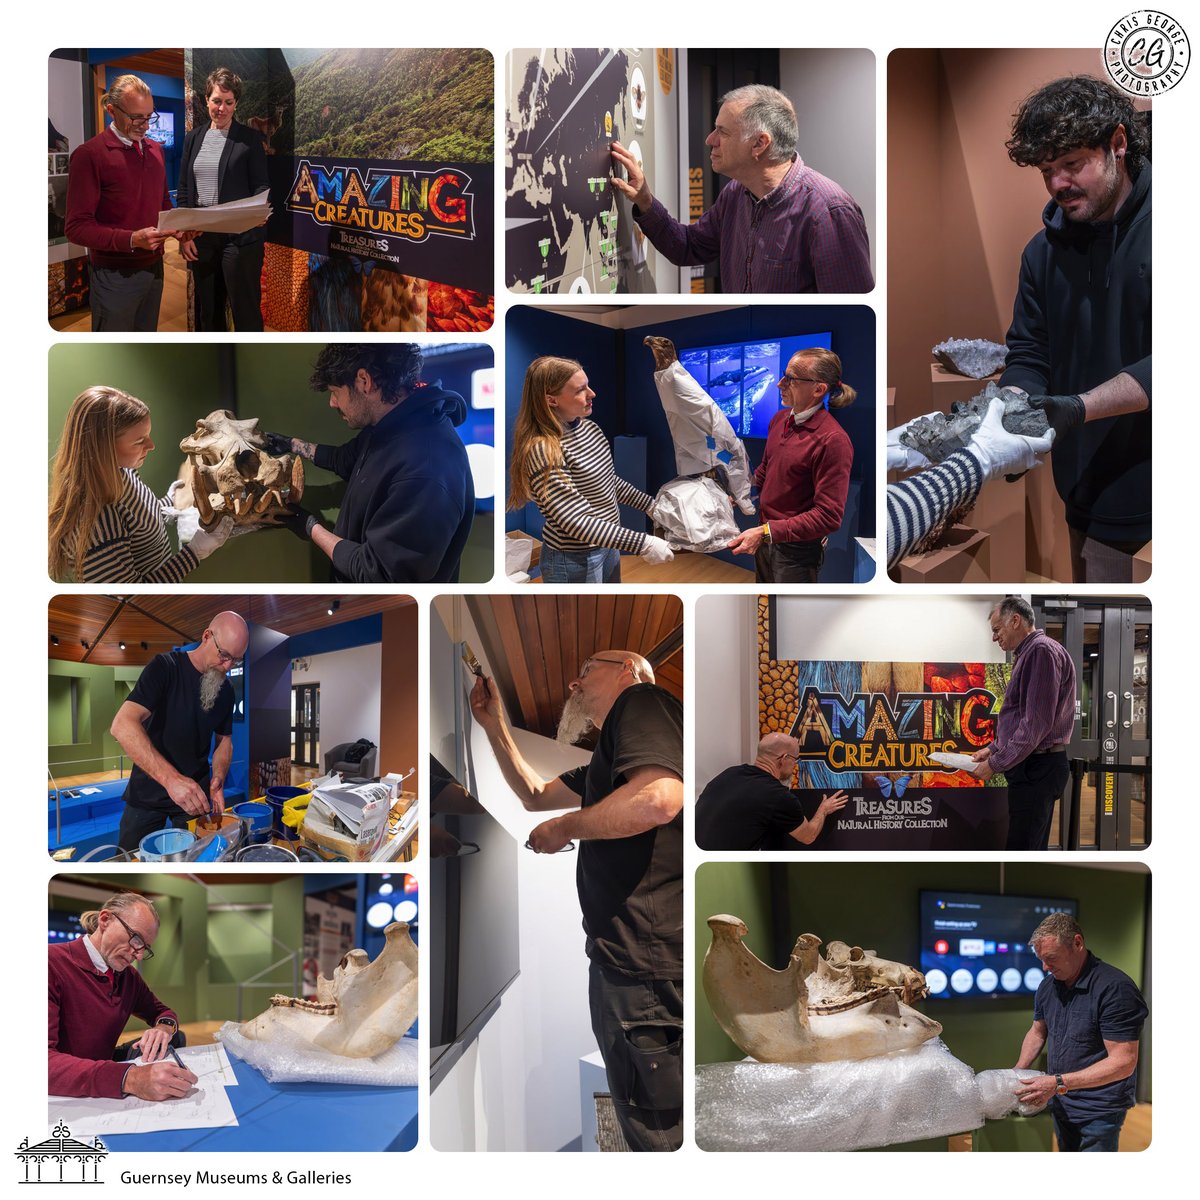 @GuernseyMuseums staff have been very busy behind the scenes preparing for their next exhibition ‘Amazing Creatures’. The exhibition opens on the 26th April and continues till the 15th September. Discover more at museums.gov.gg